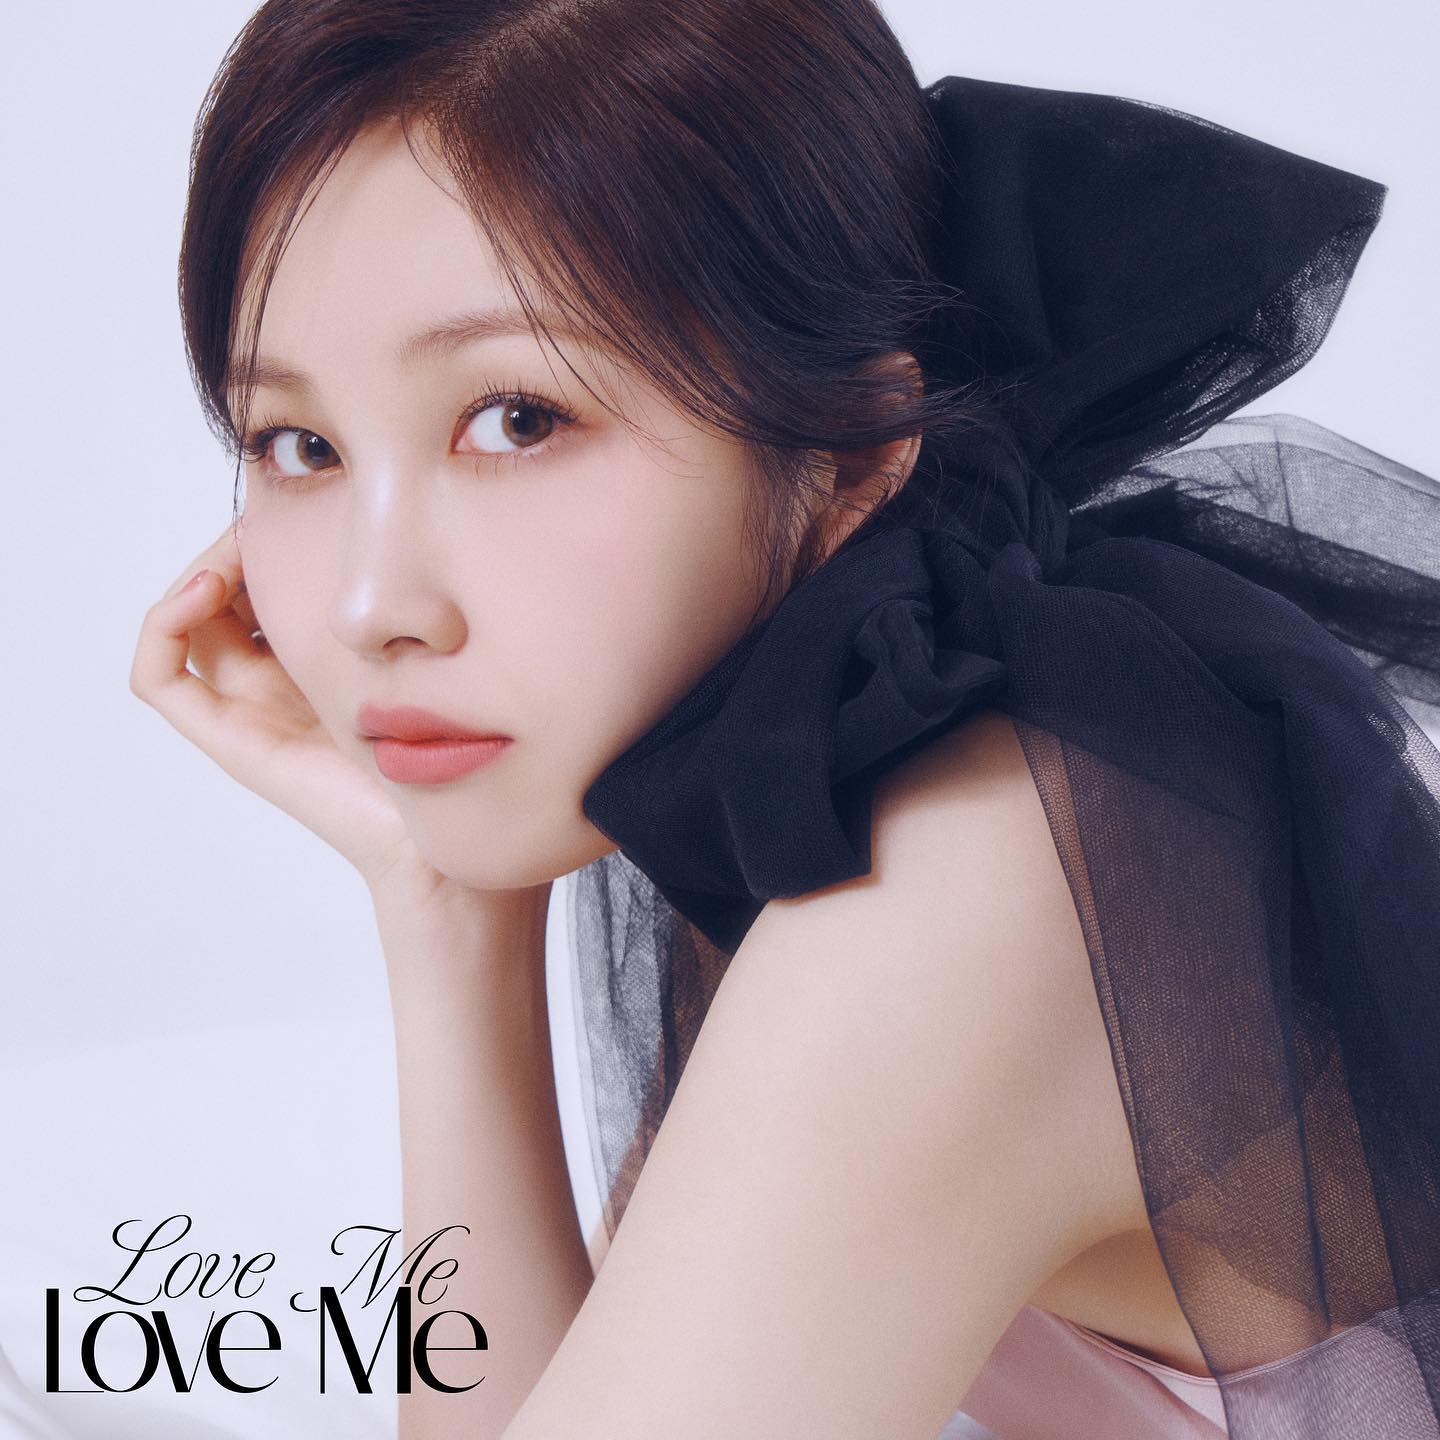 Kwon Jin-ah, 'Love Me Love Me' released on the 10th...Confession of a summer day